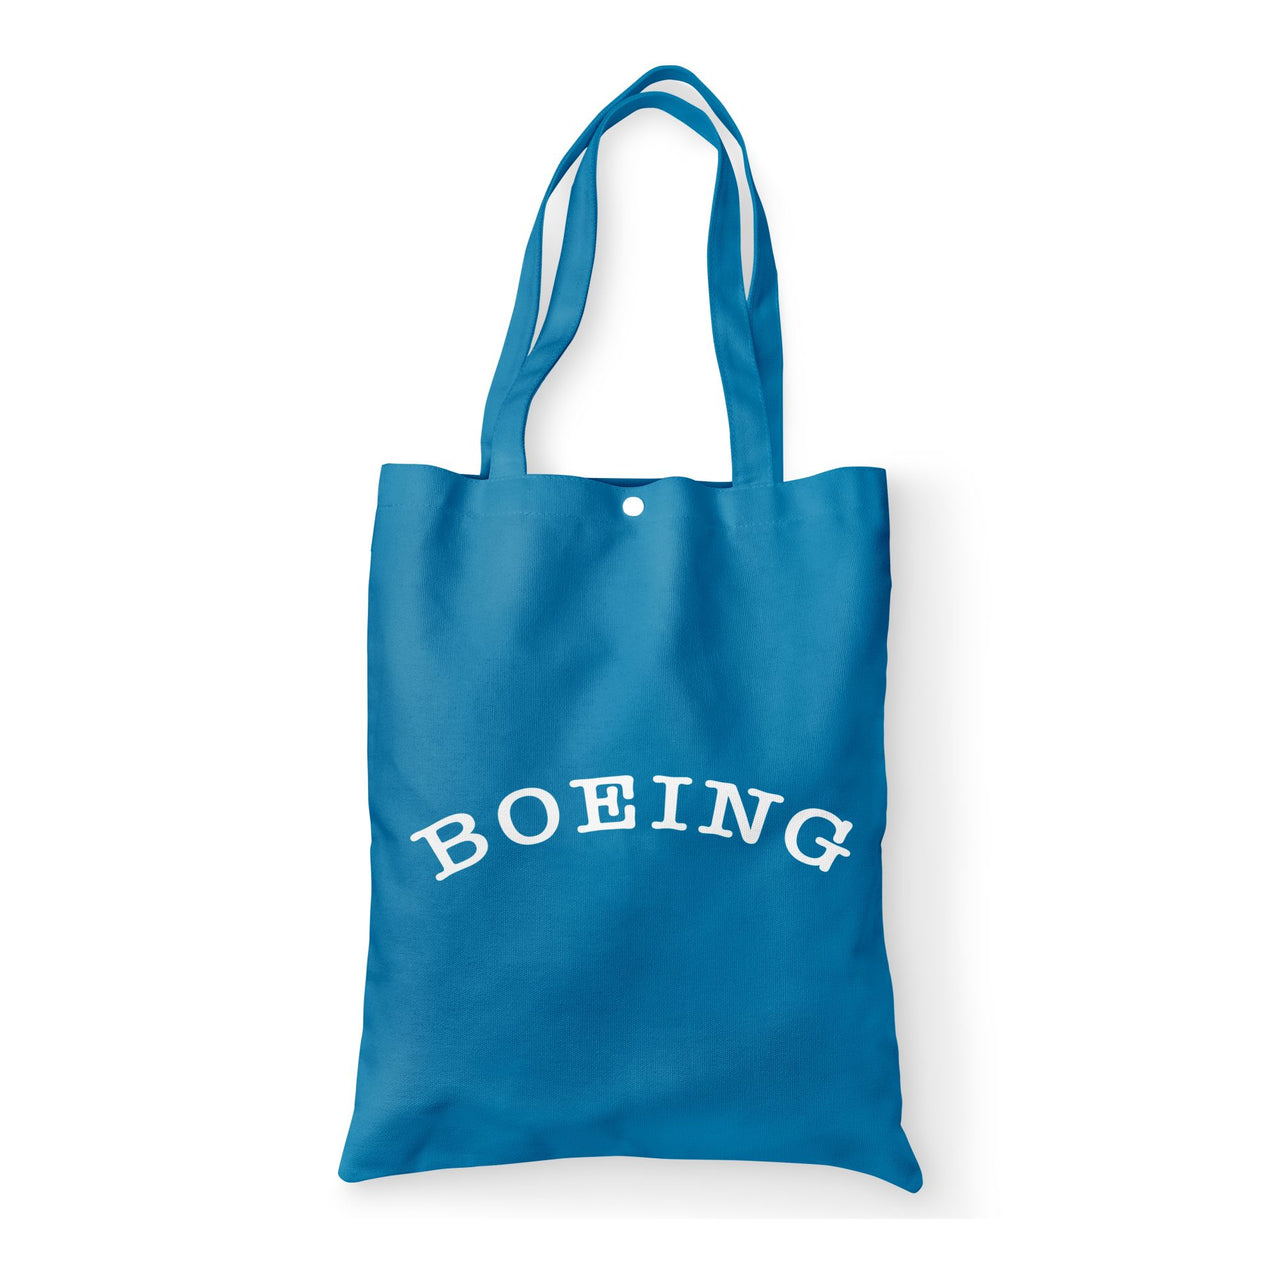 Special BOEING Text Designed Tote Bags